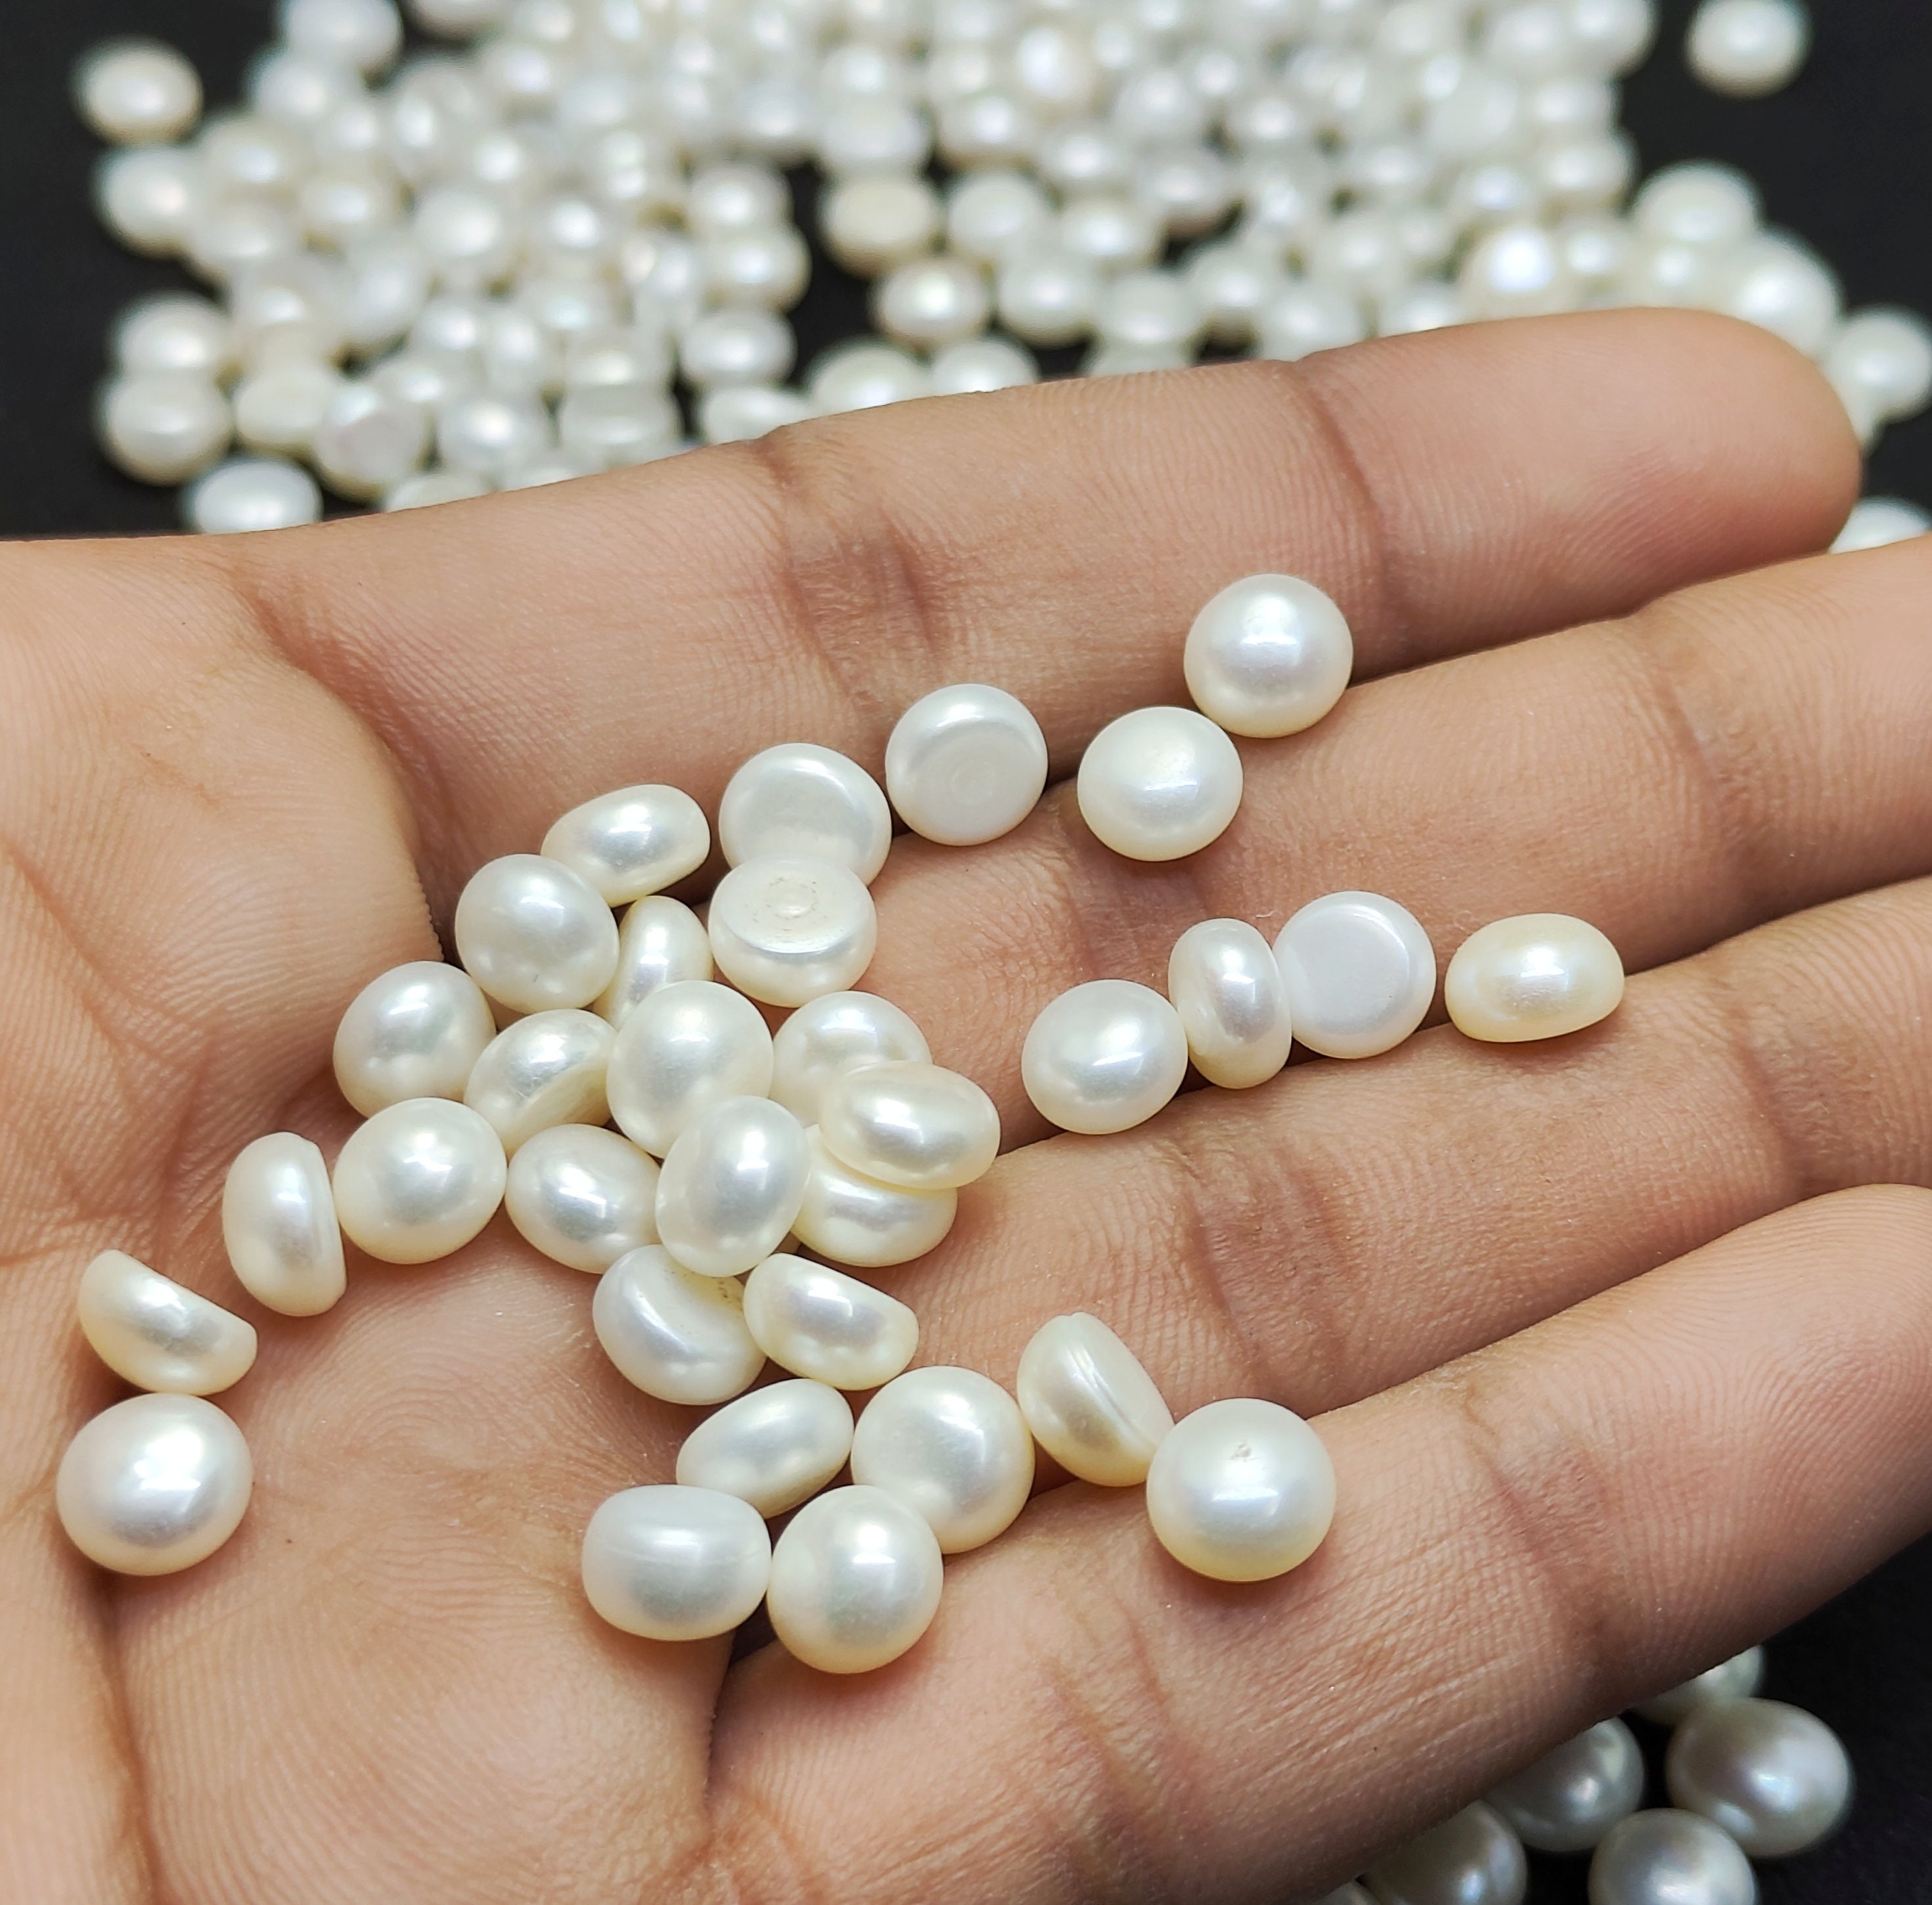 Christmas Pearl Beads, Red Green Gold Silver Pearls , 100-120 Beads Craft  Beads, 2 Sizes to Choose From , 4mm or 6 Mm , Cards, Decorations 